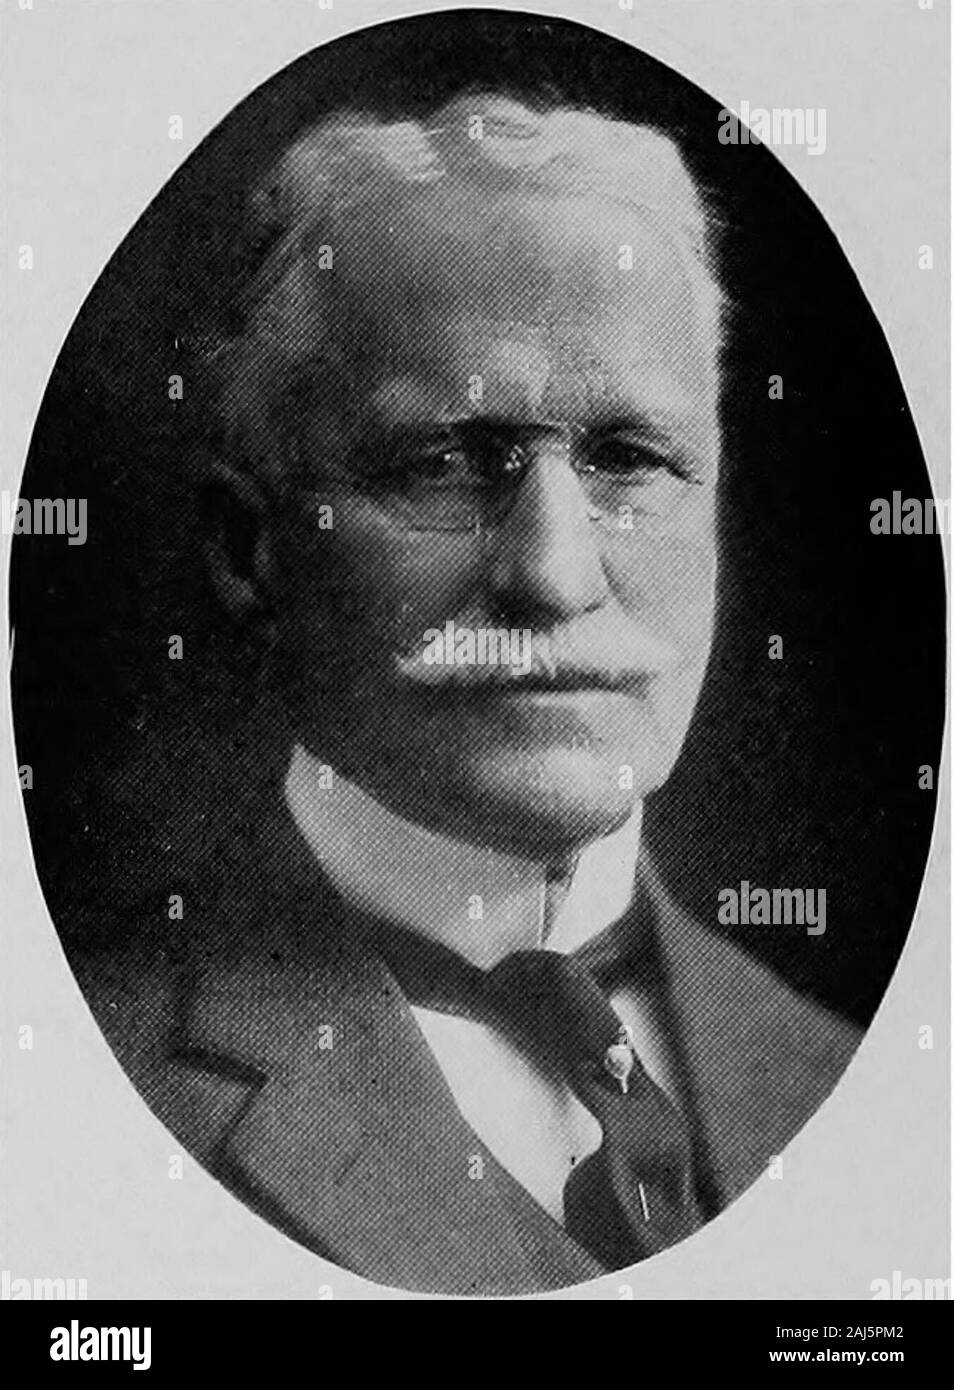 Empire state notables, 1914 . PAUL MONROE University Prof., Adjunct Prof., History of Edn 1899-1902, Since 1902 Teachers Coll., Columbia University, Lecturer in Education Yale University 1906-1907 New York City PROF. HENRY SMITH MUNROE, Ph.D., S.D. Professor of Mining, School of Mines, Columbia University New York City Stock Photo